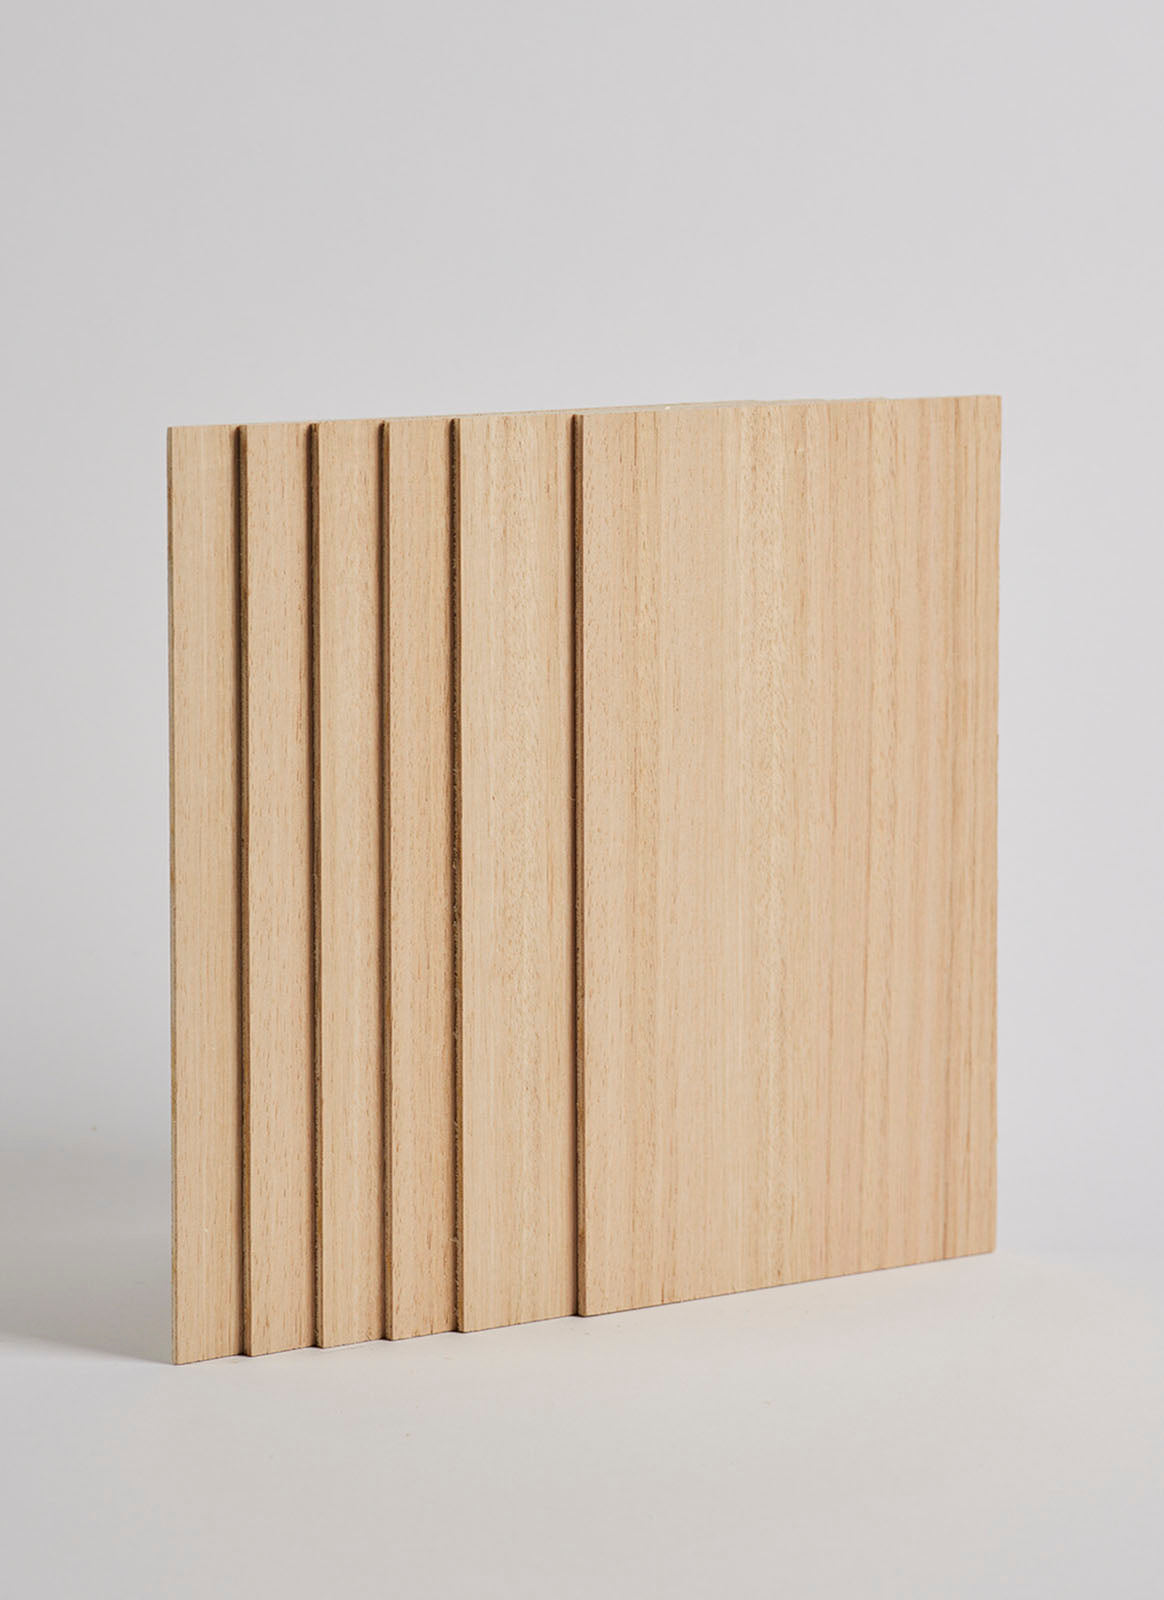 Melbourne plywood supplier Plyco's 3mm Victorian Ash Legnoply Pack for laser cutting and engraving on a white background